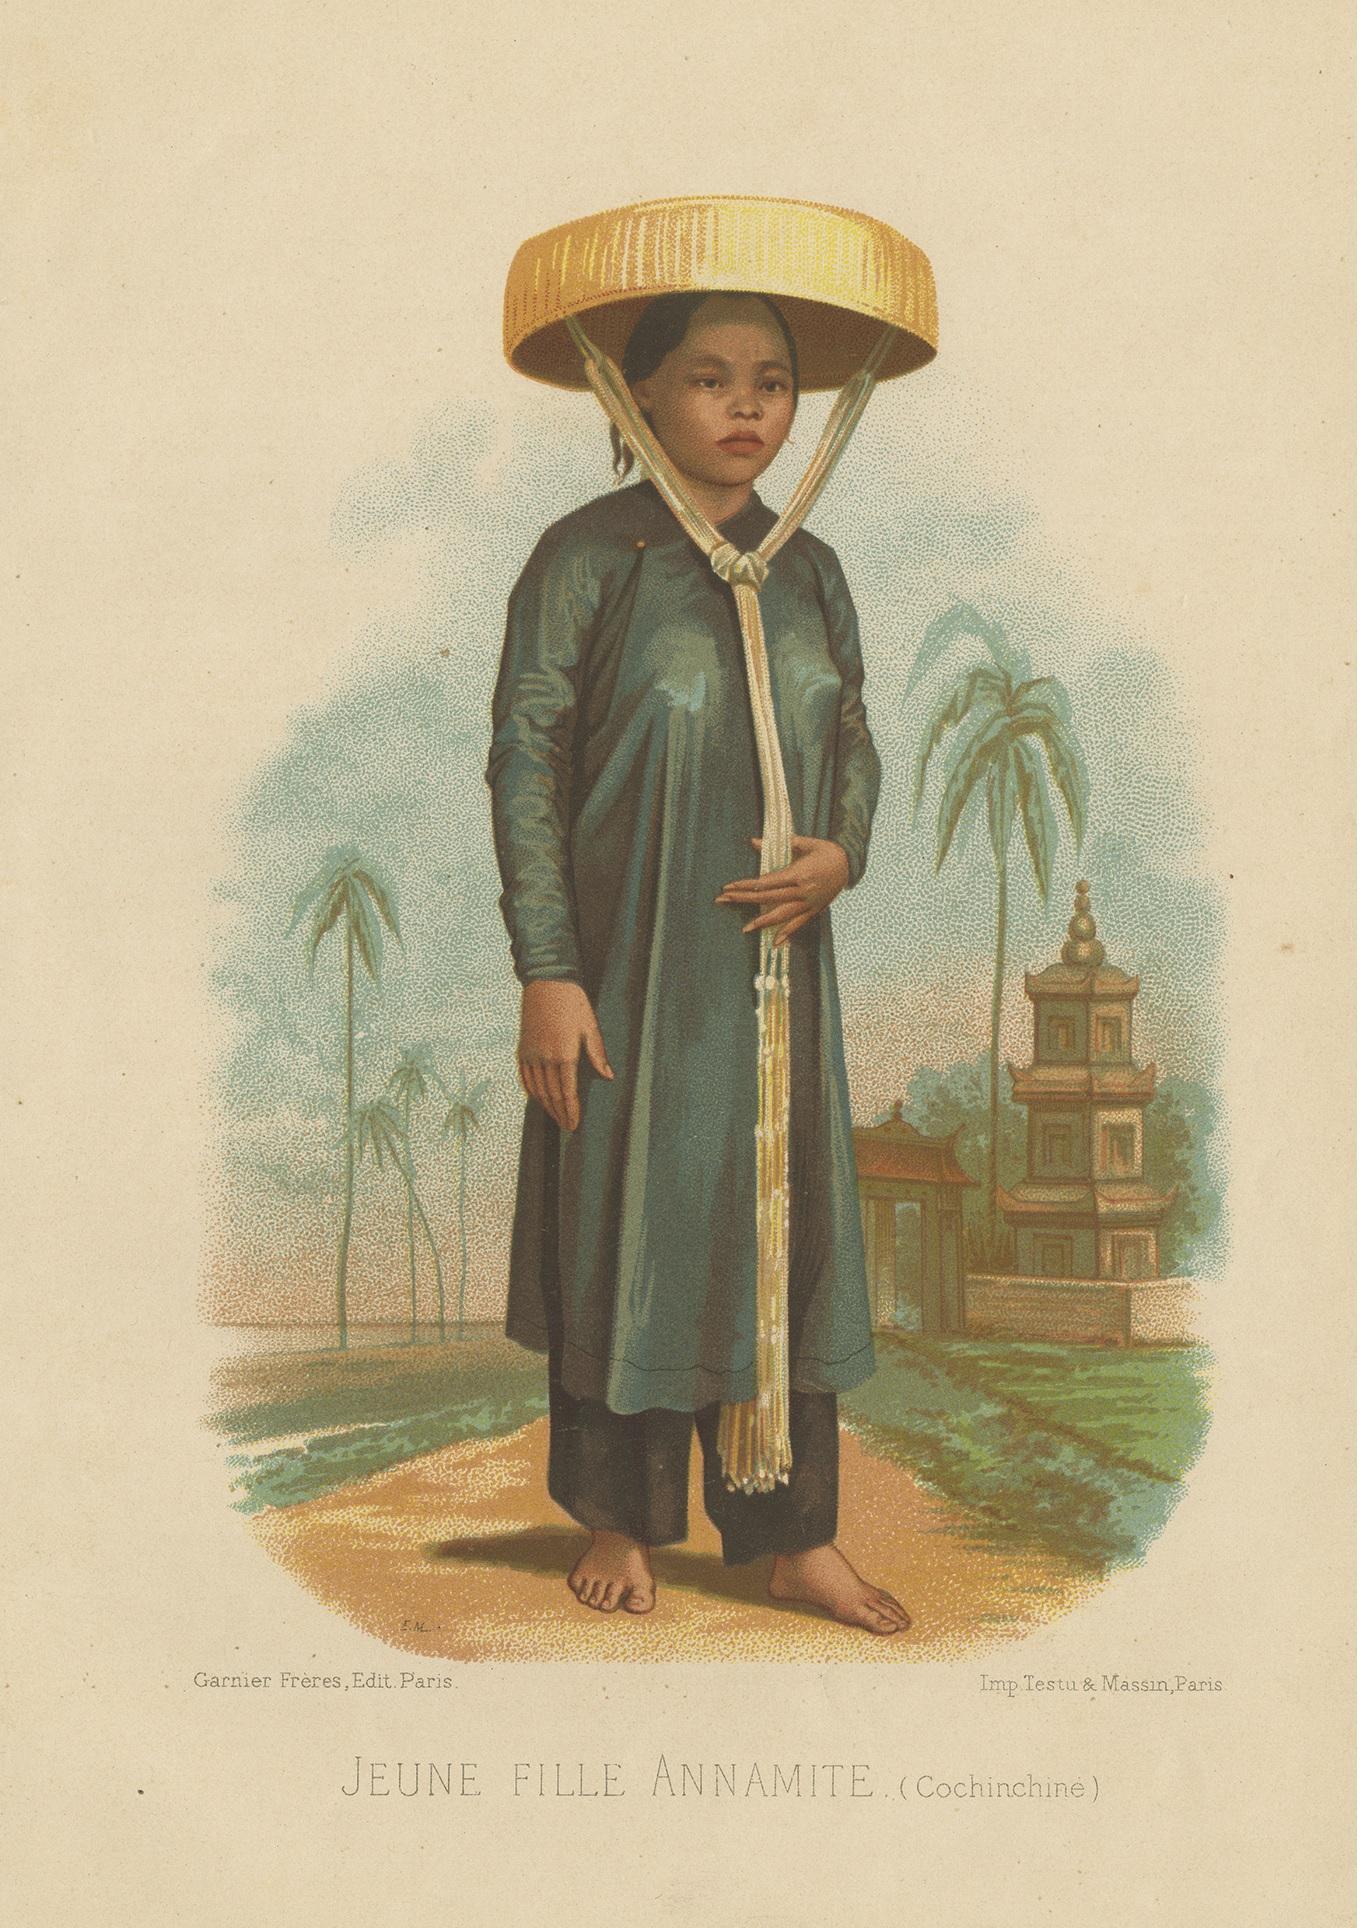 Antique print titled 'Jeune Fille Annamite (Cochinchine)'. Lithograph of a young woman of Cochinchina. Cochinchina or Quinam is a region encompassing the southern third of current Vietnam whose principal city is Saigon.